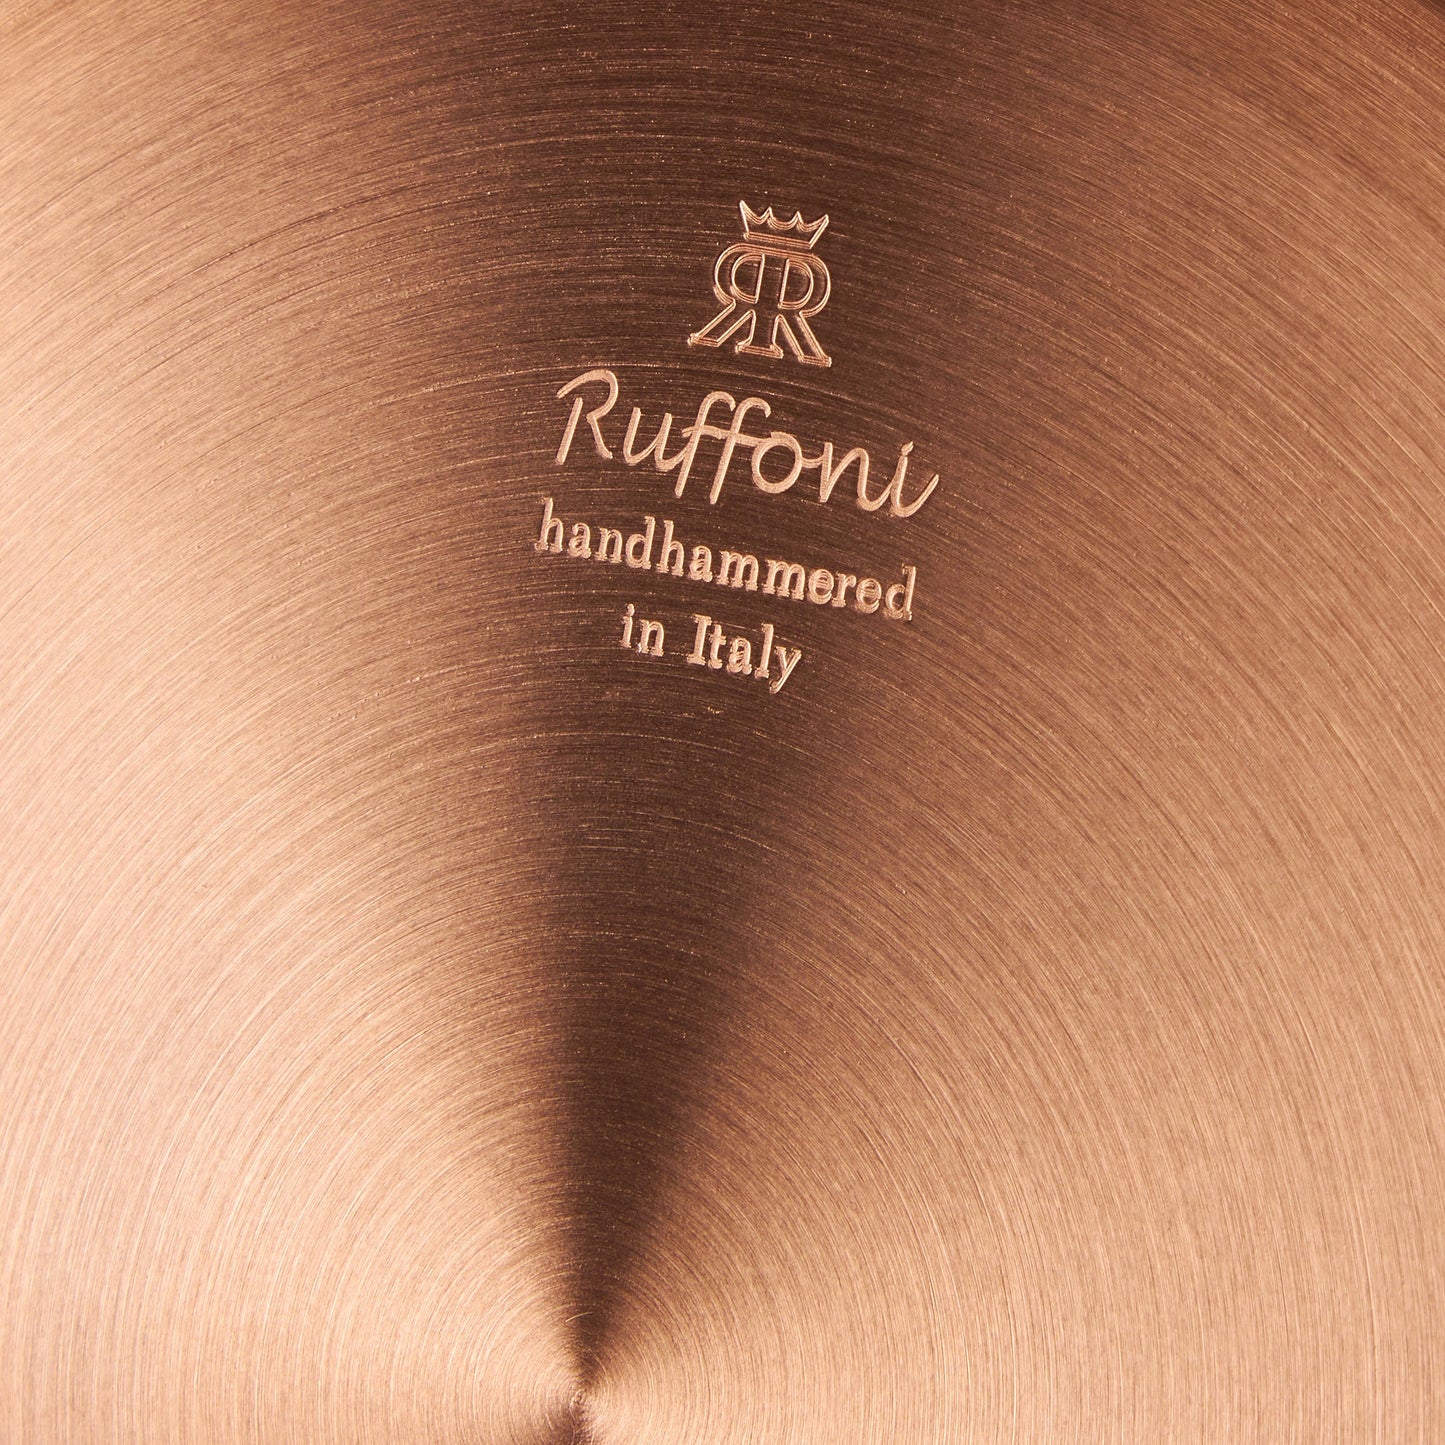 Ruffoni Made in Italy brand logo stamped under Opus Cupra copper soup pot for authenticity